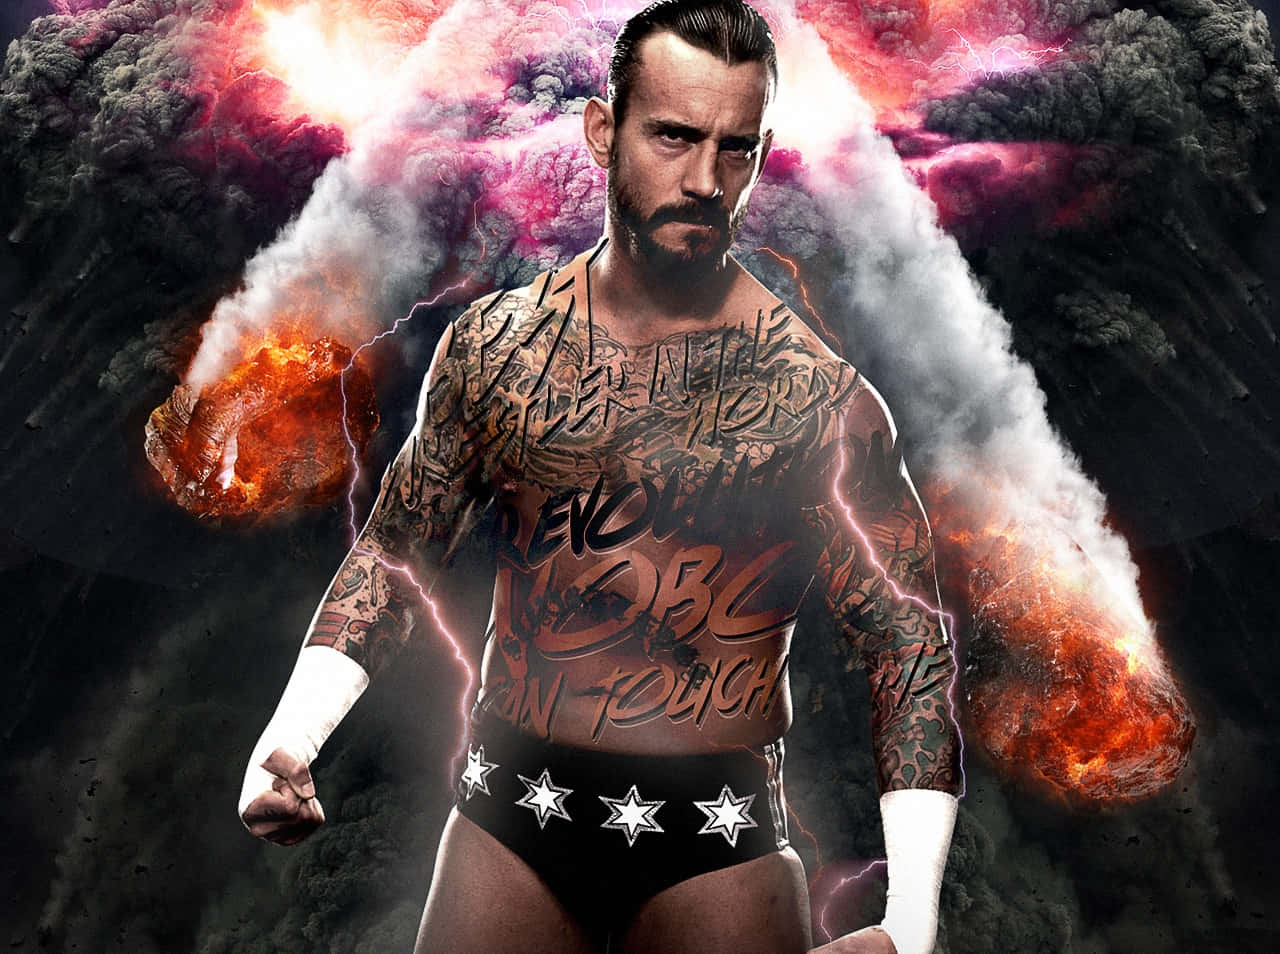 Wwe Wrestler With Tattoos In Front Of A Fireball Background